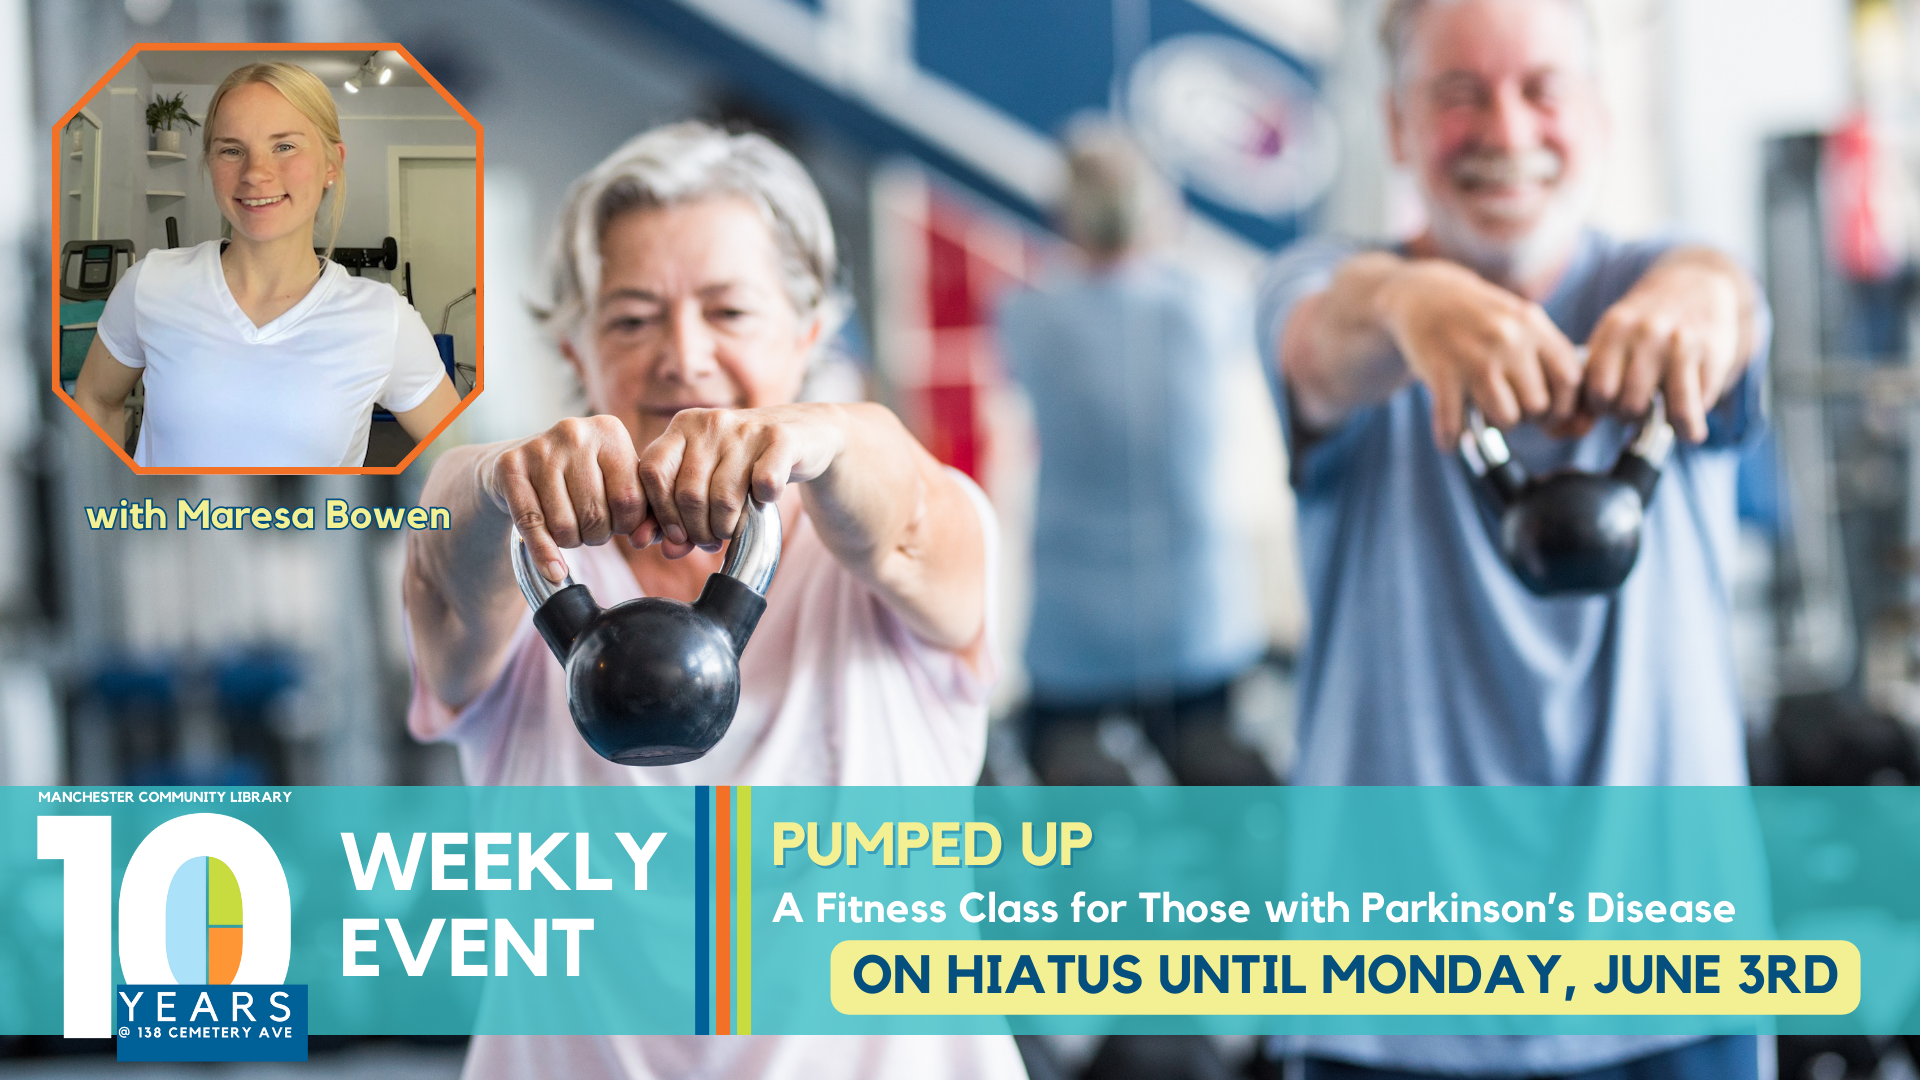 Image shows two people using weights with a portrait of Maresa Bowen superimposed on the upper left. The caption beneath her portrait reads "with Maresa Bowen" Text along the Bottom reads "Weekly events - Pumped up: A fitness class for those with Parkinson's Disease, On hiatus until June 3rd"